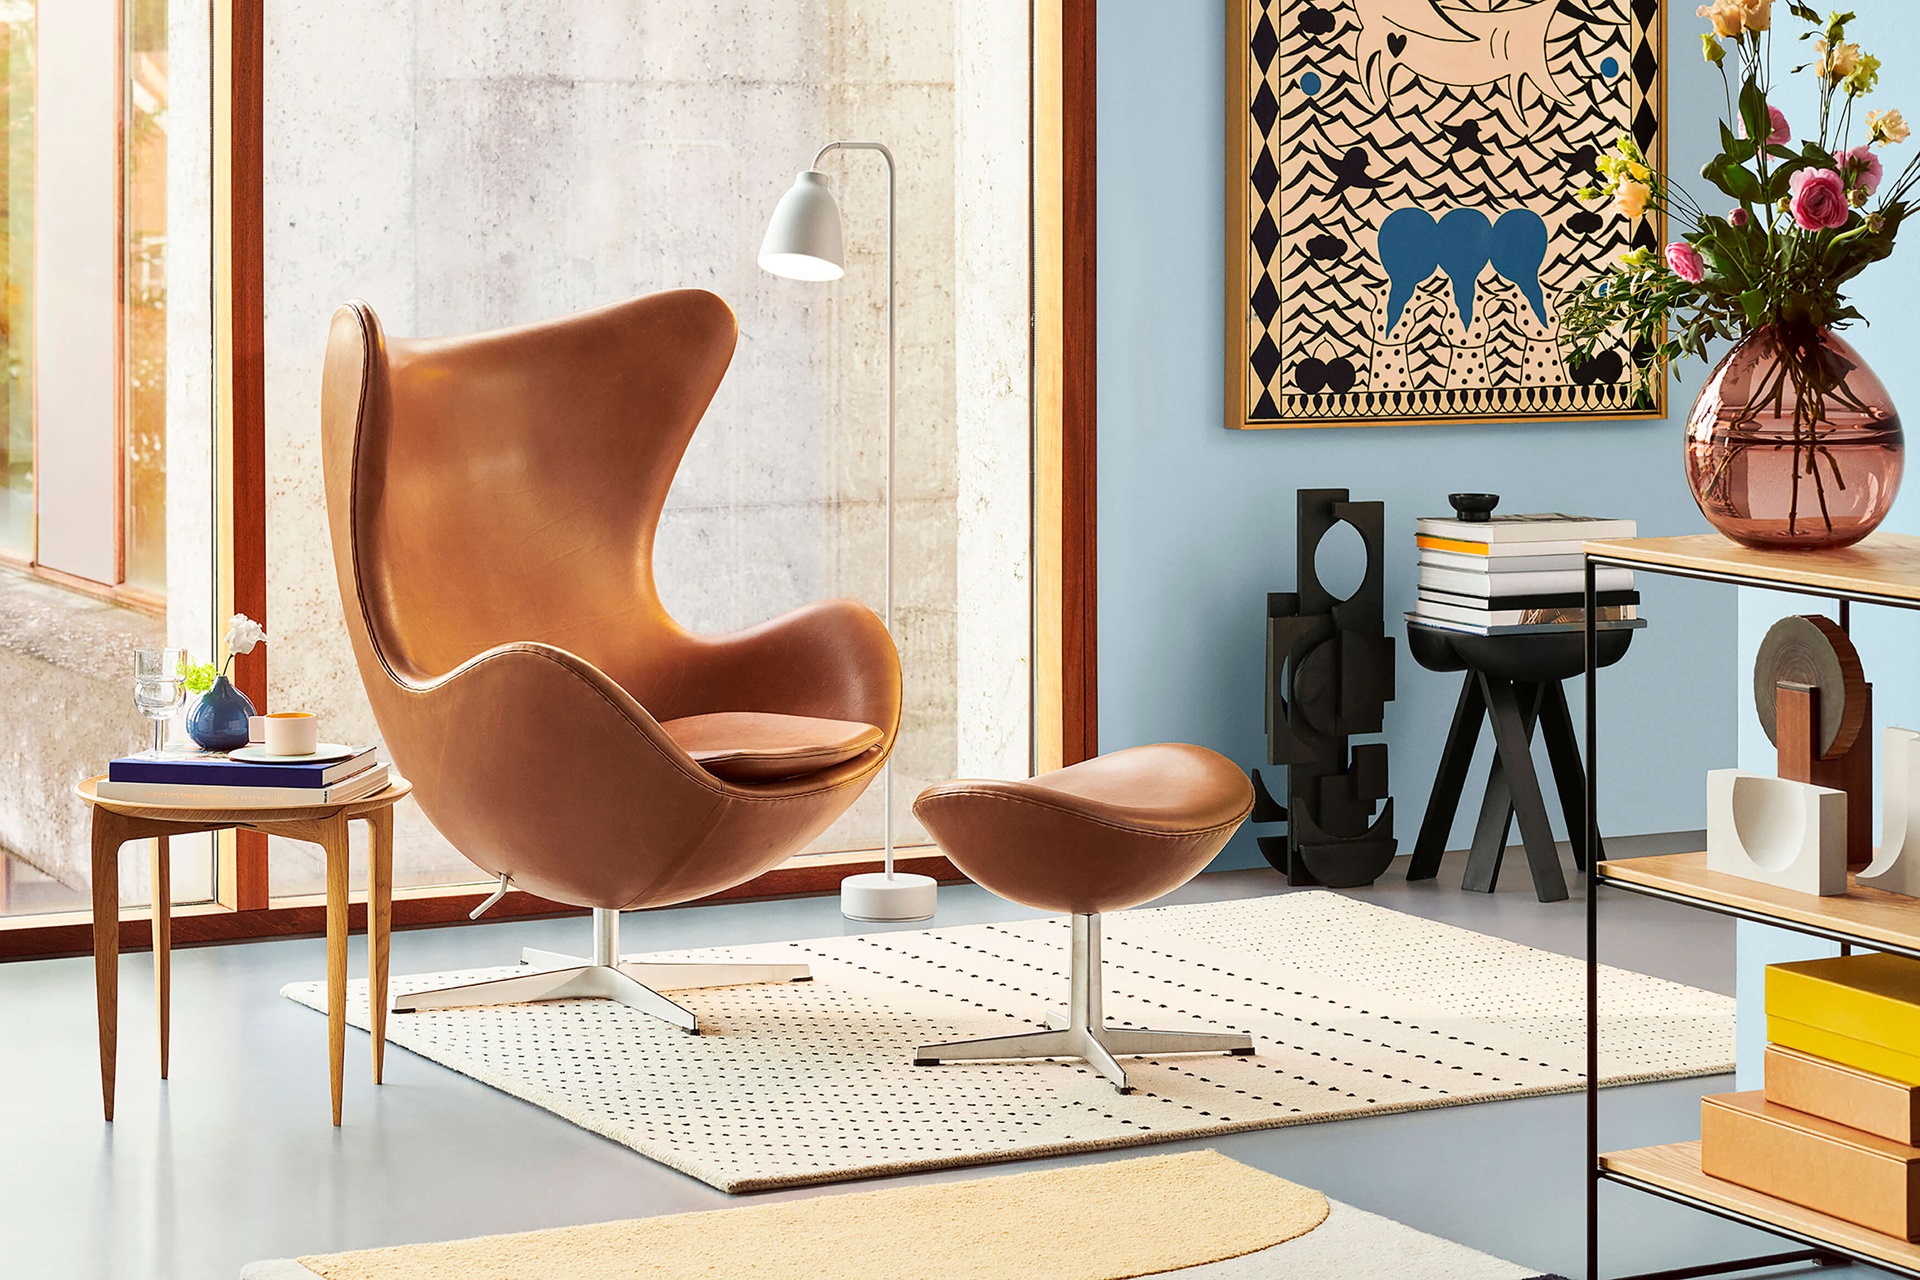 Most expensive office chairs - #7 Arne Jacobson Egg Chair - €9,864